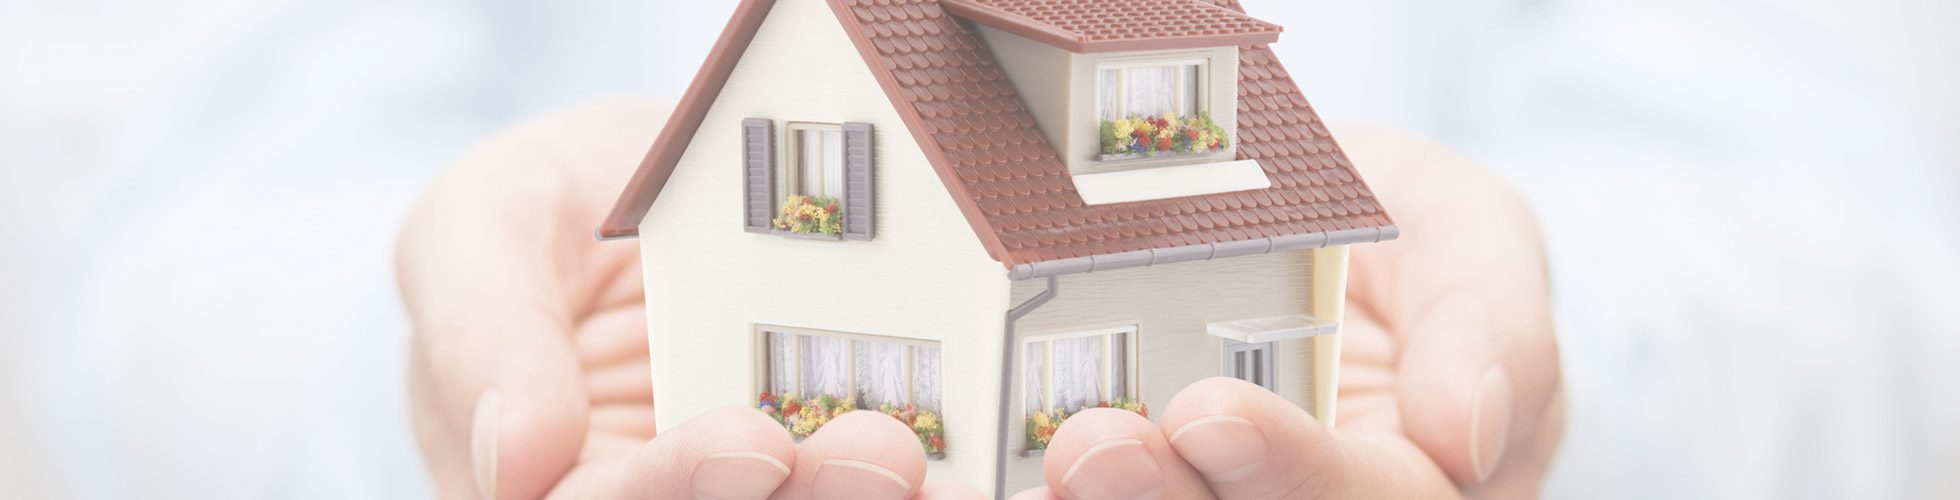 Image of hands holding a toy house for Will the ‘feudal’ leasehold system finally be overhauled? blog